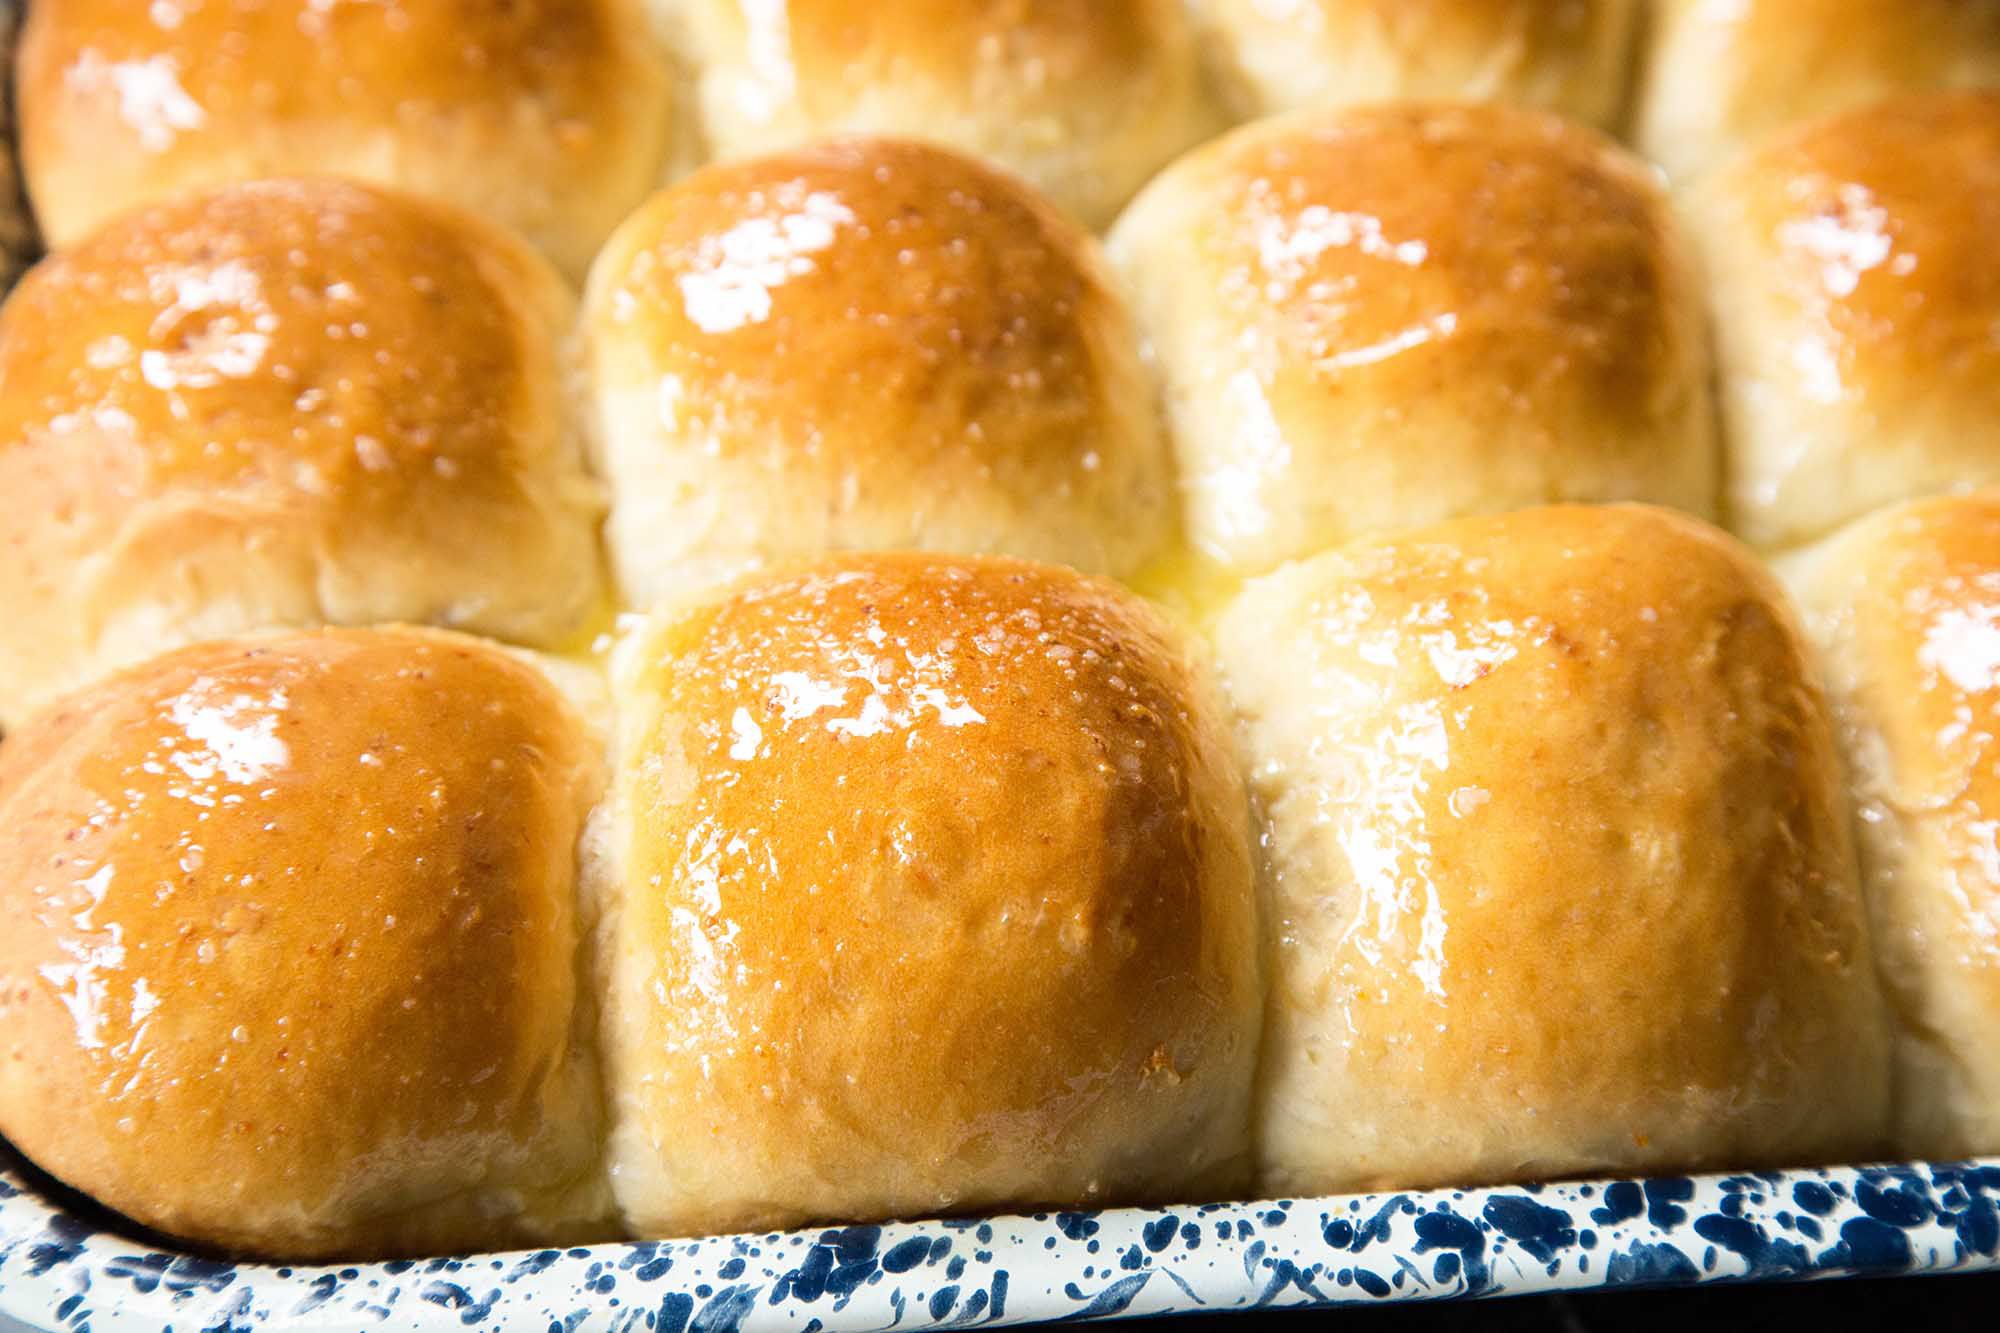 Freshly baked Asian milk bread rolls on a cooling rack, with a golden crust and a soft, fluffy texture, ready to be served